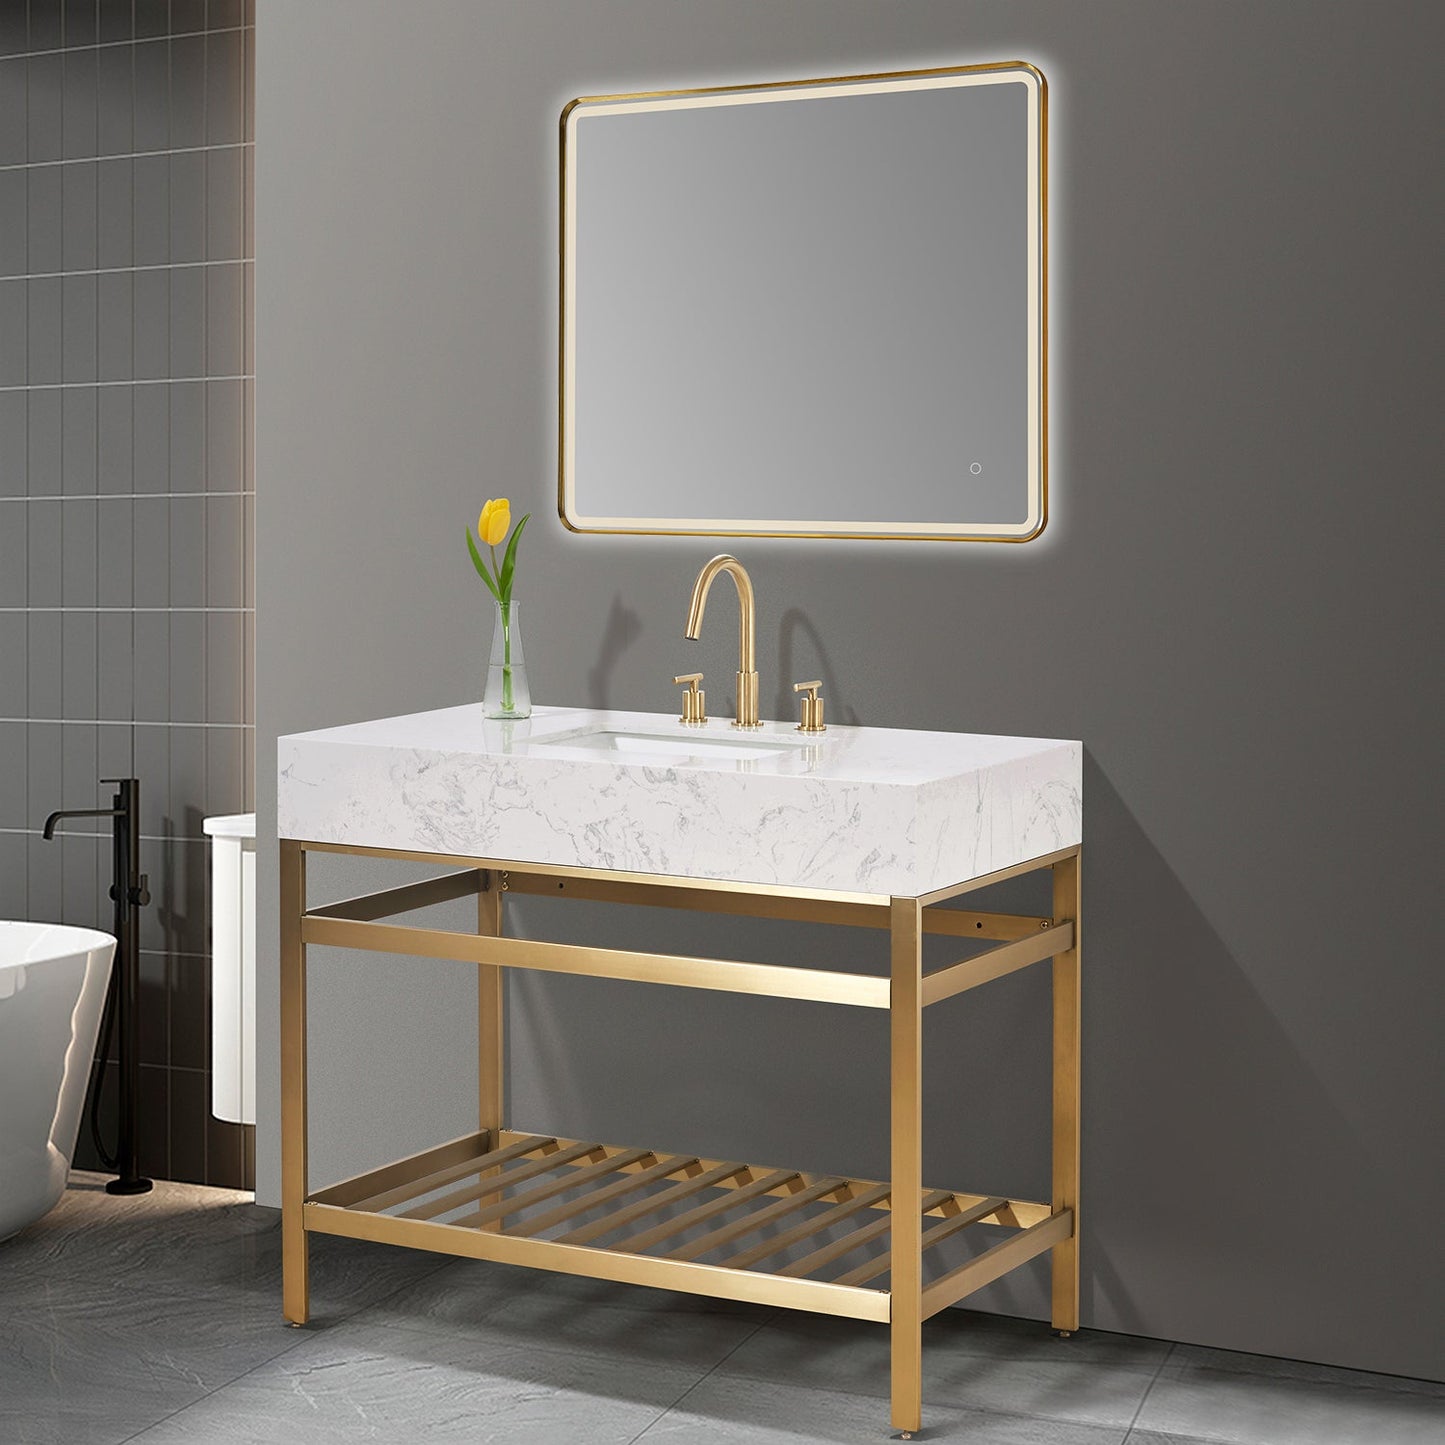 Merano 42" Single Stainless Steel Vanity Console in Brushed Gold with Aosta White Stone Countertop and Mirror